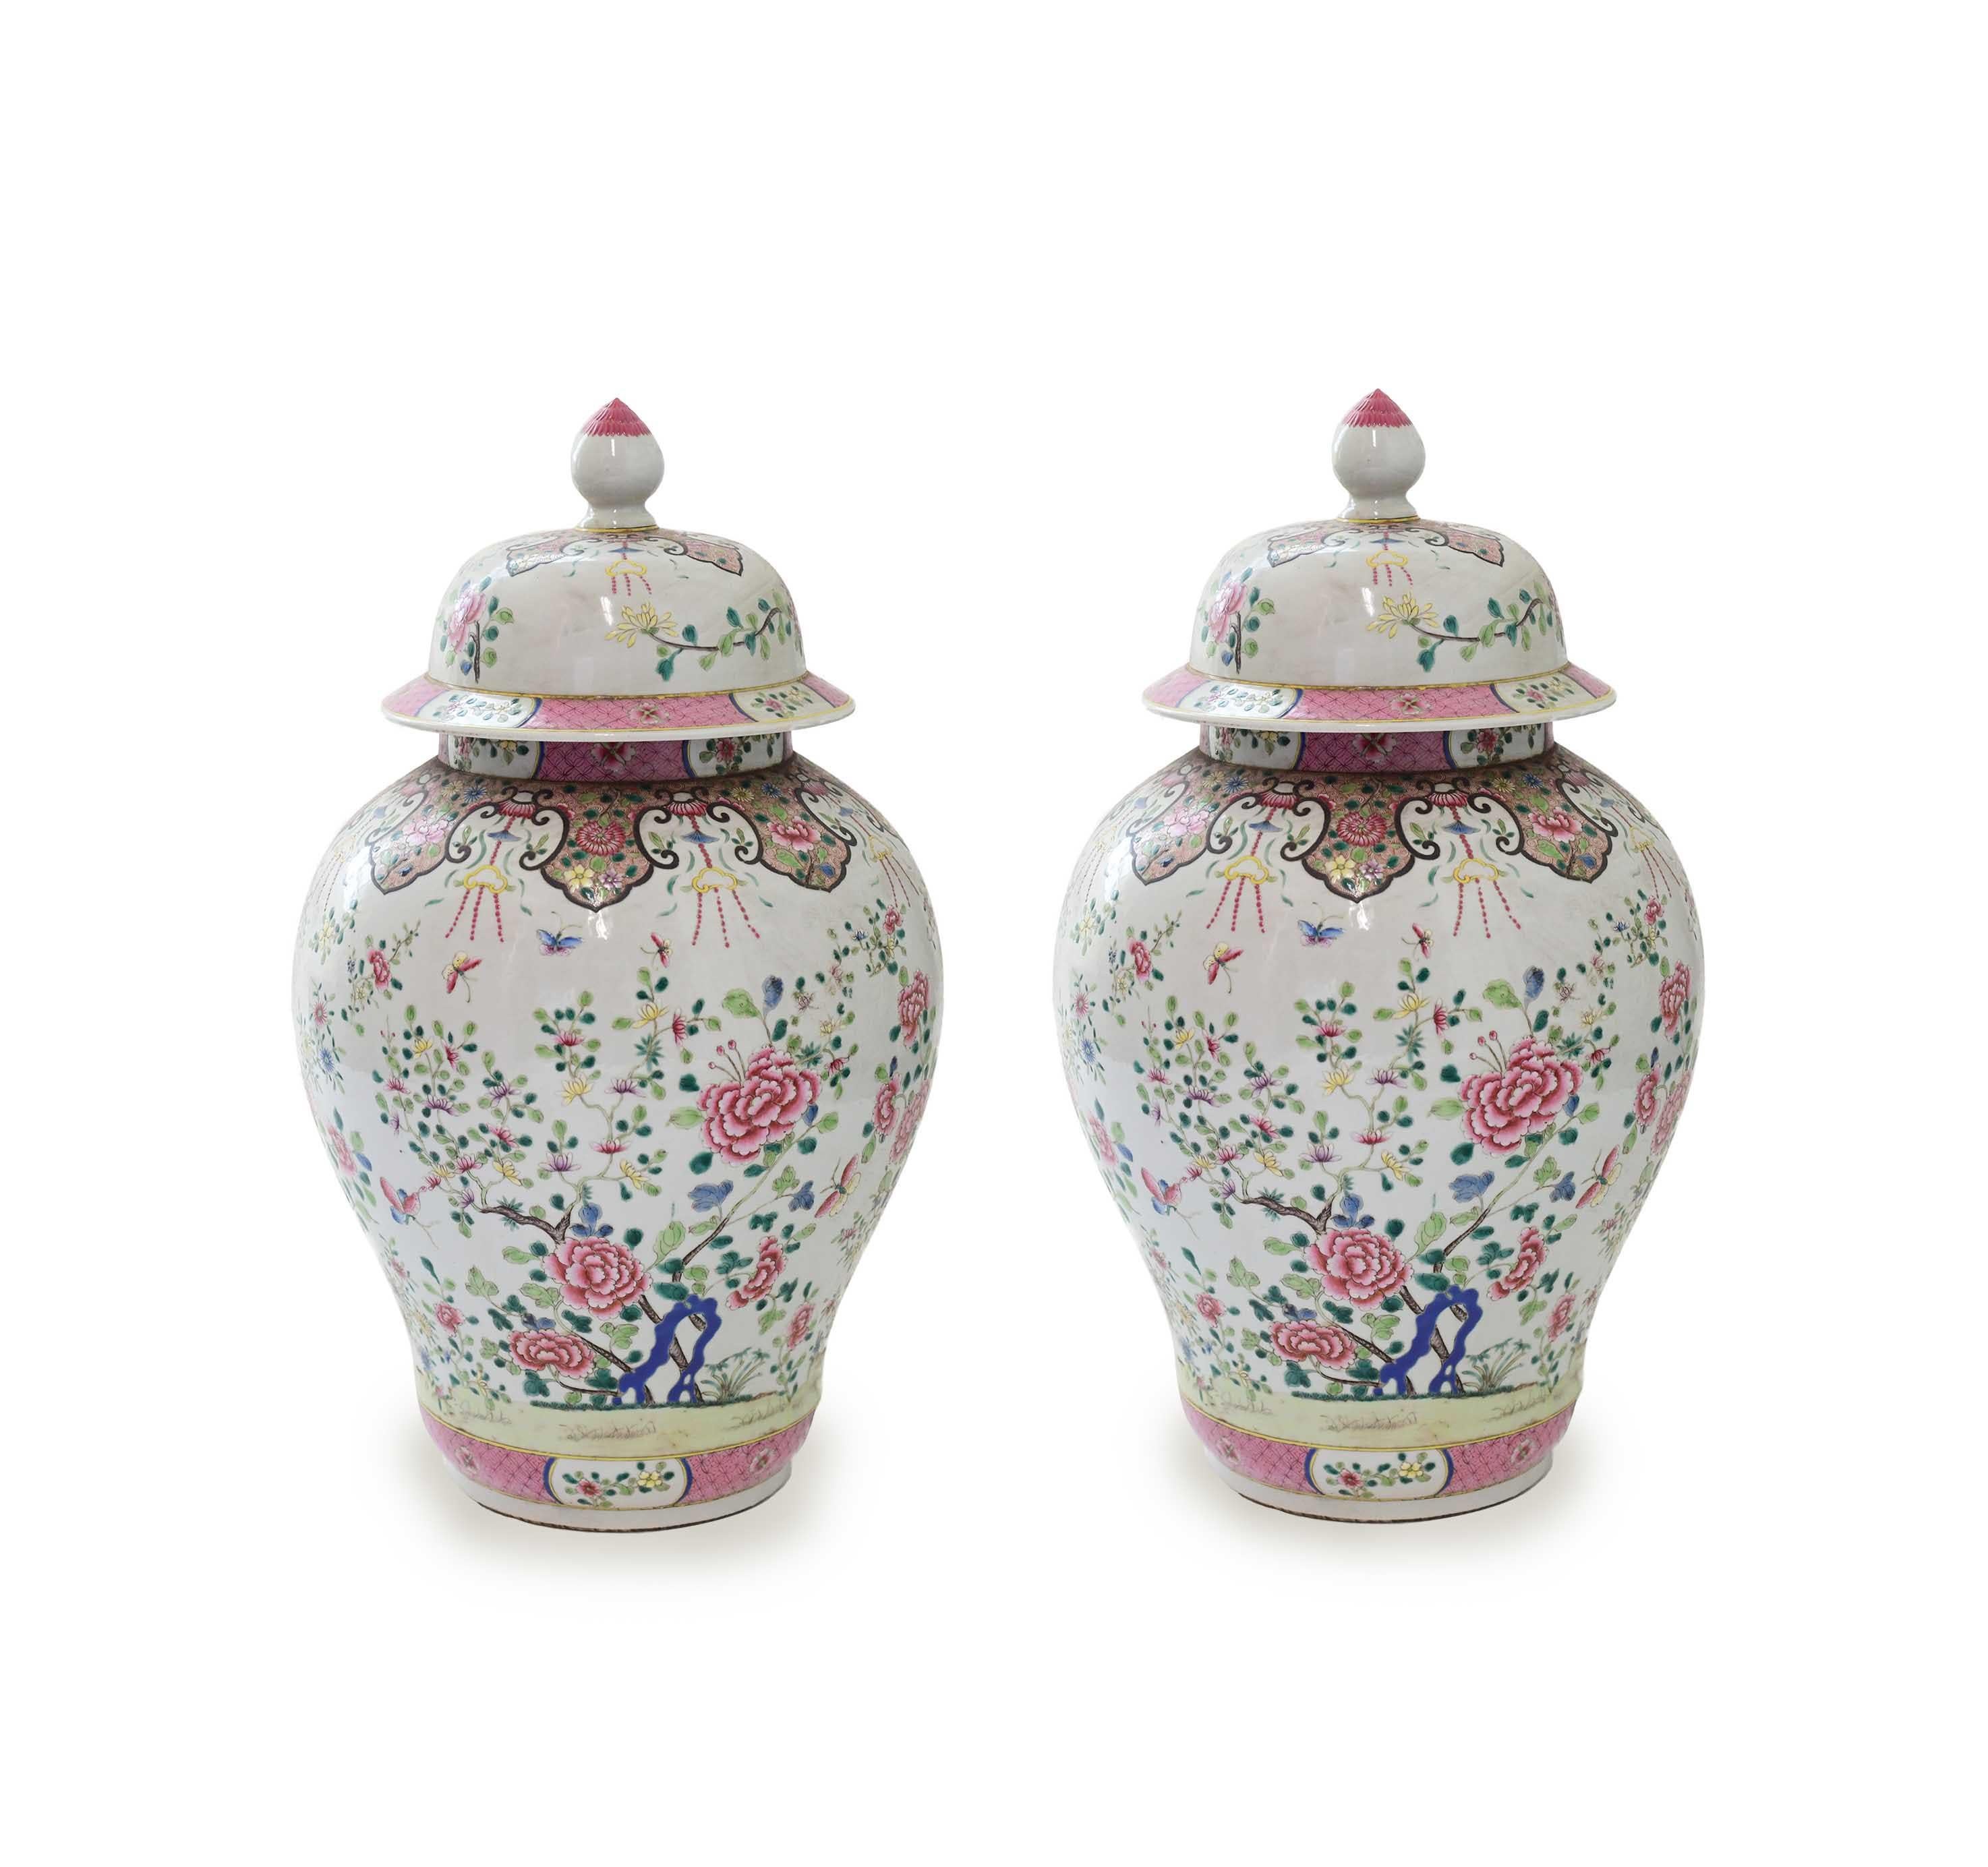 Fine painted porcelain vases with flowers bloom decoration.